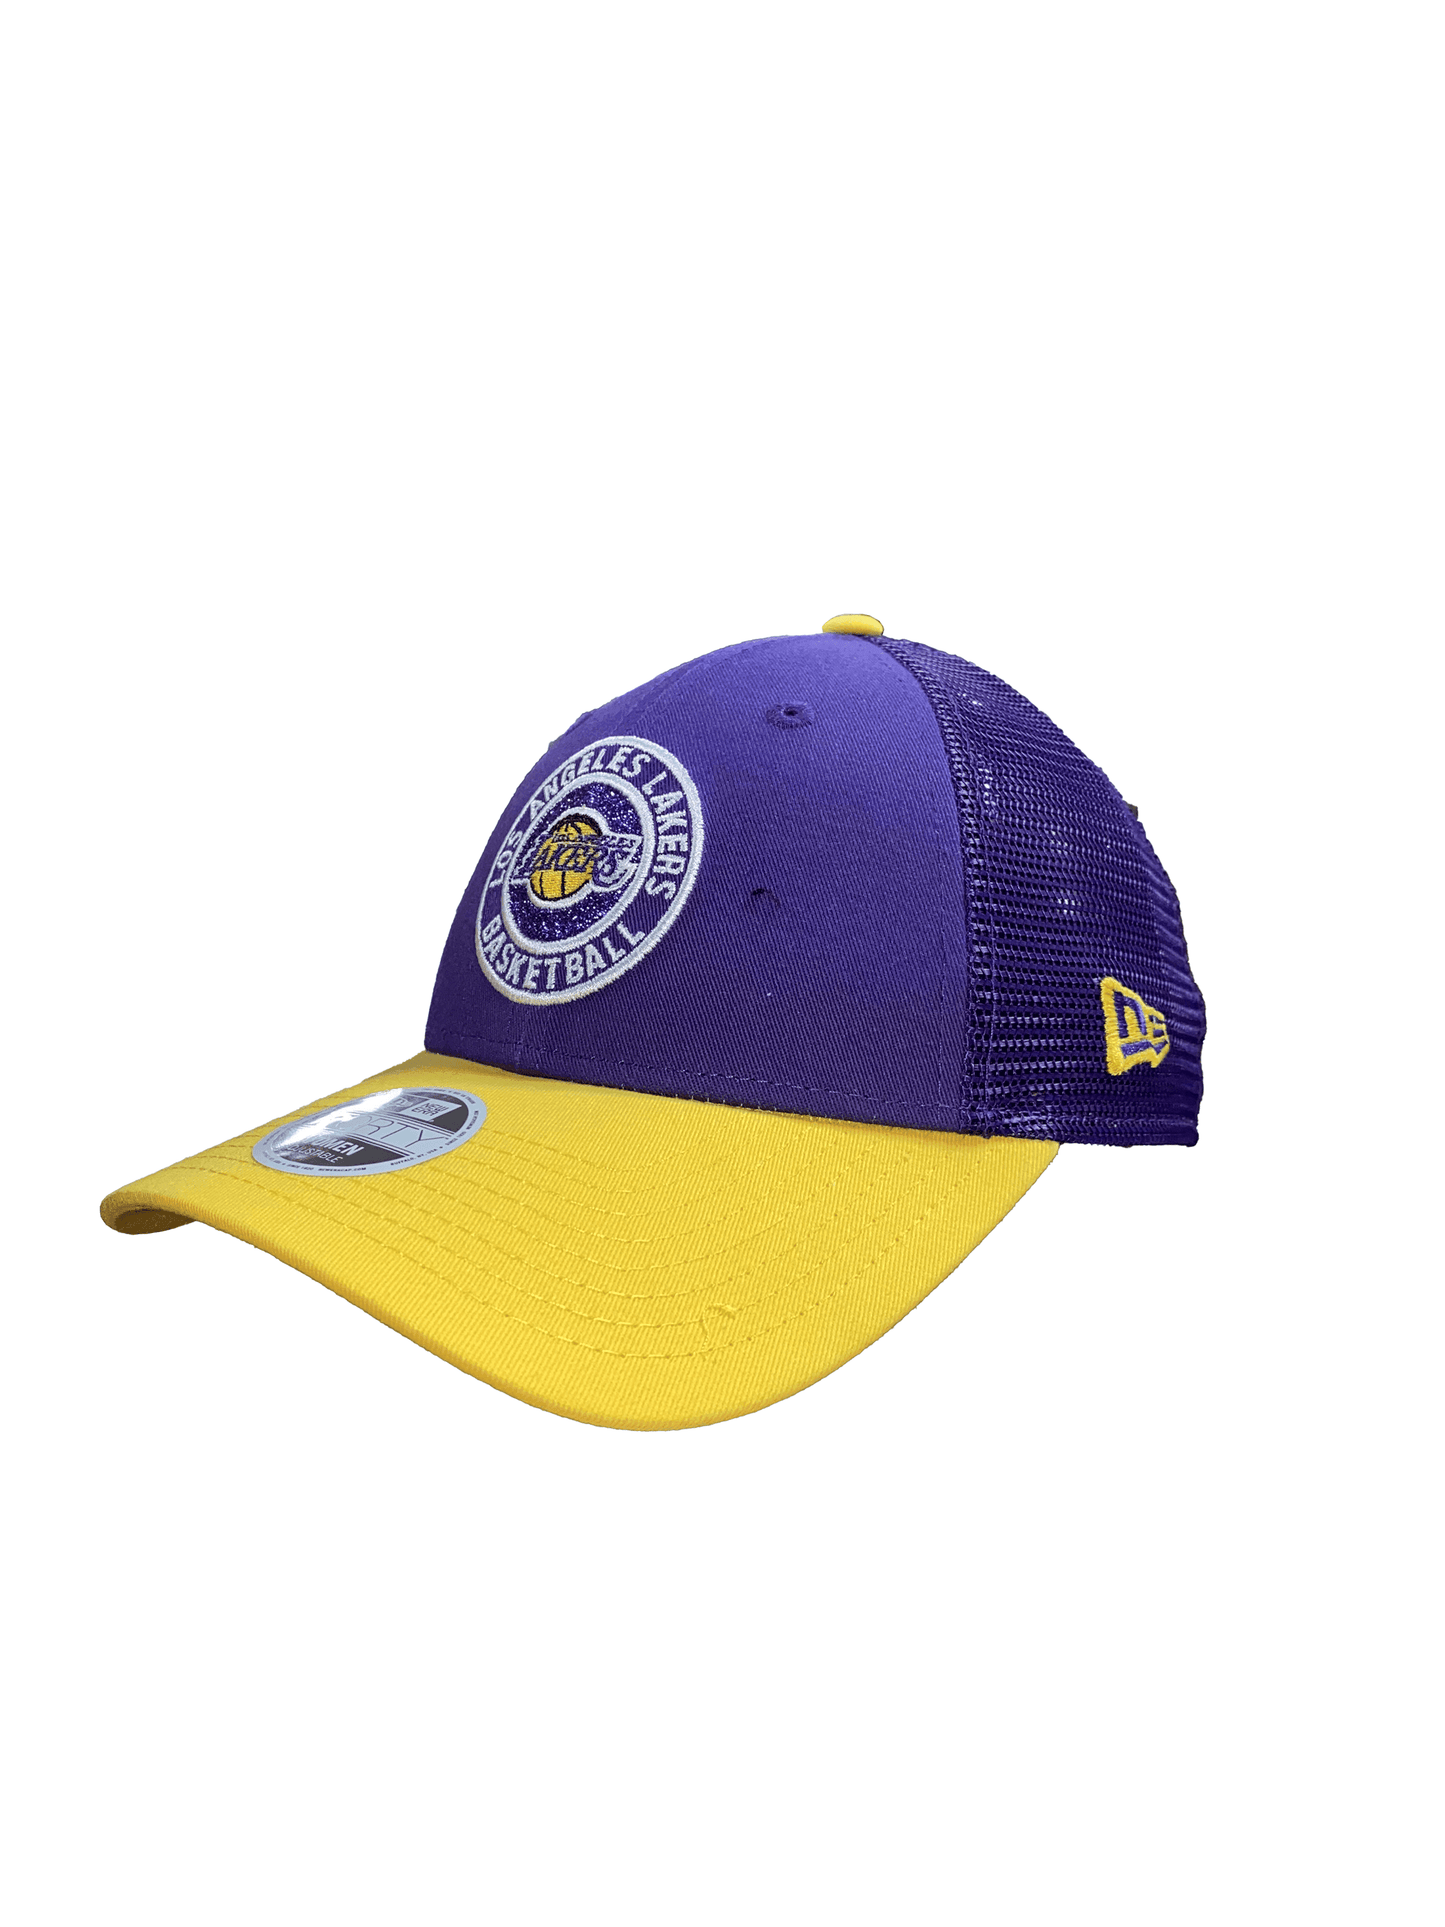 GORRA AJUSTABLE 9FORTY GLITTER MUJER LOS ANGELES LAKERS